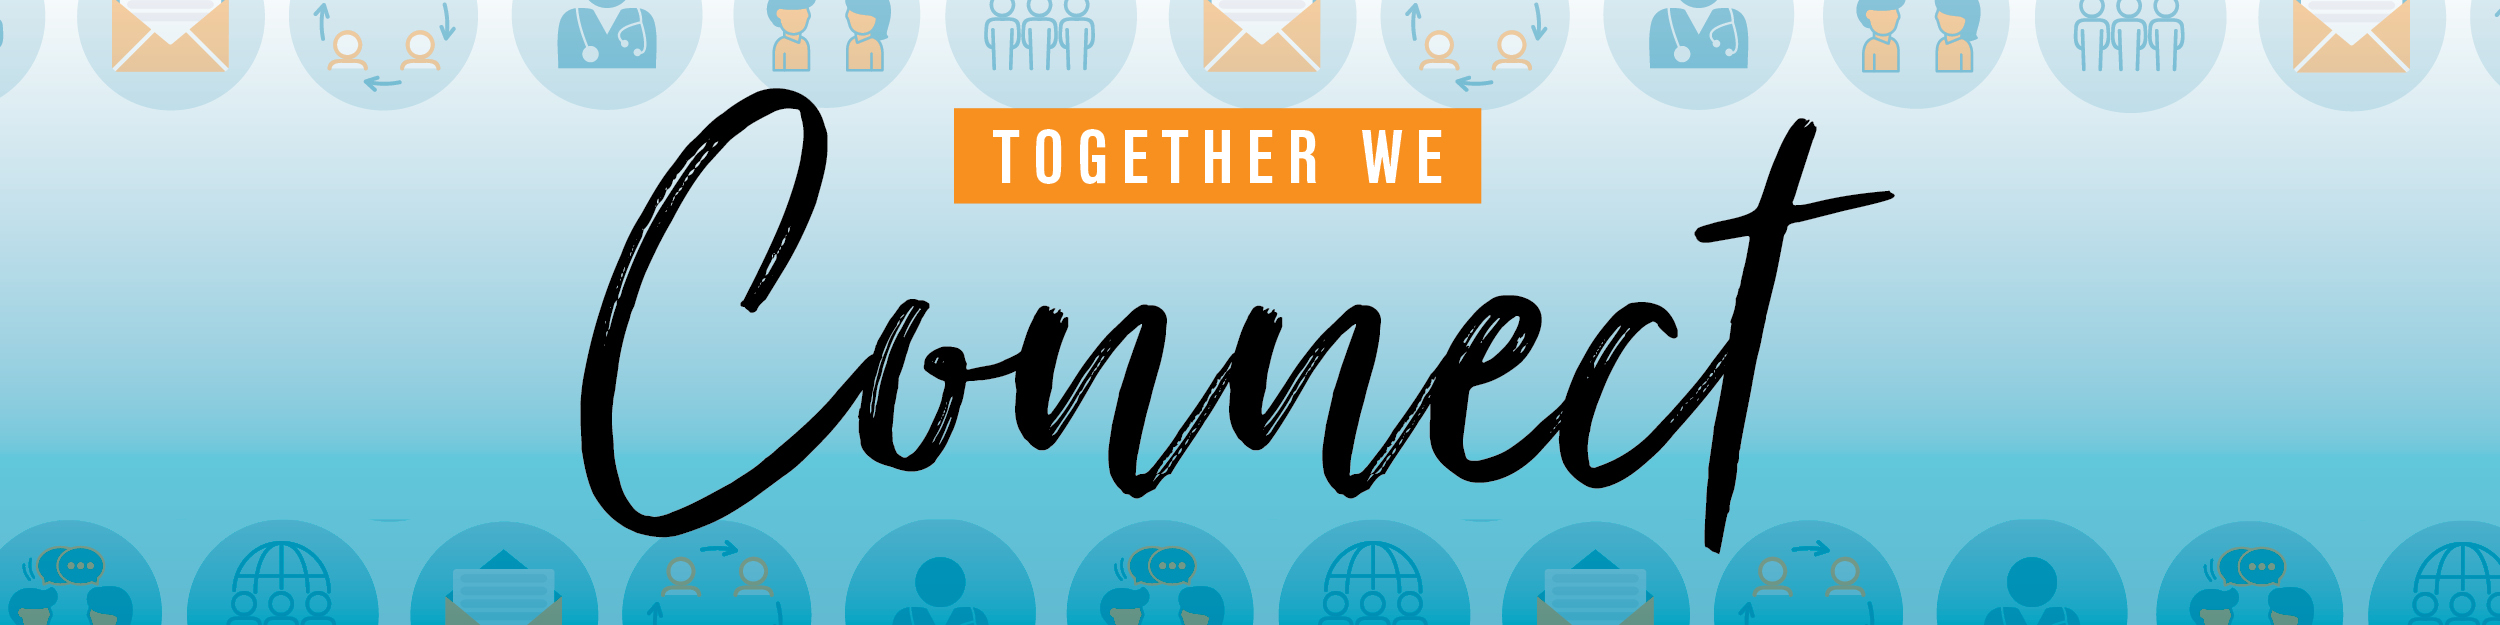 Together We Connect